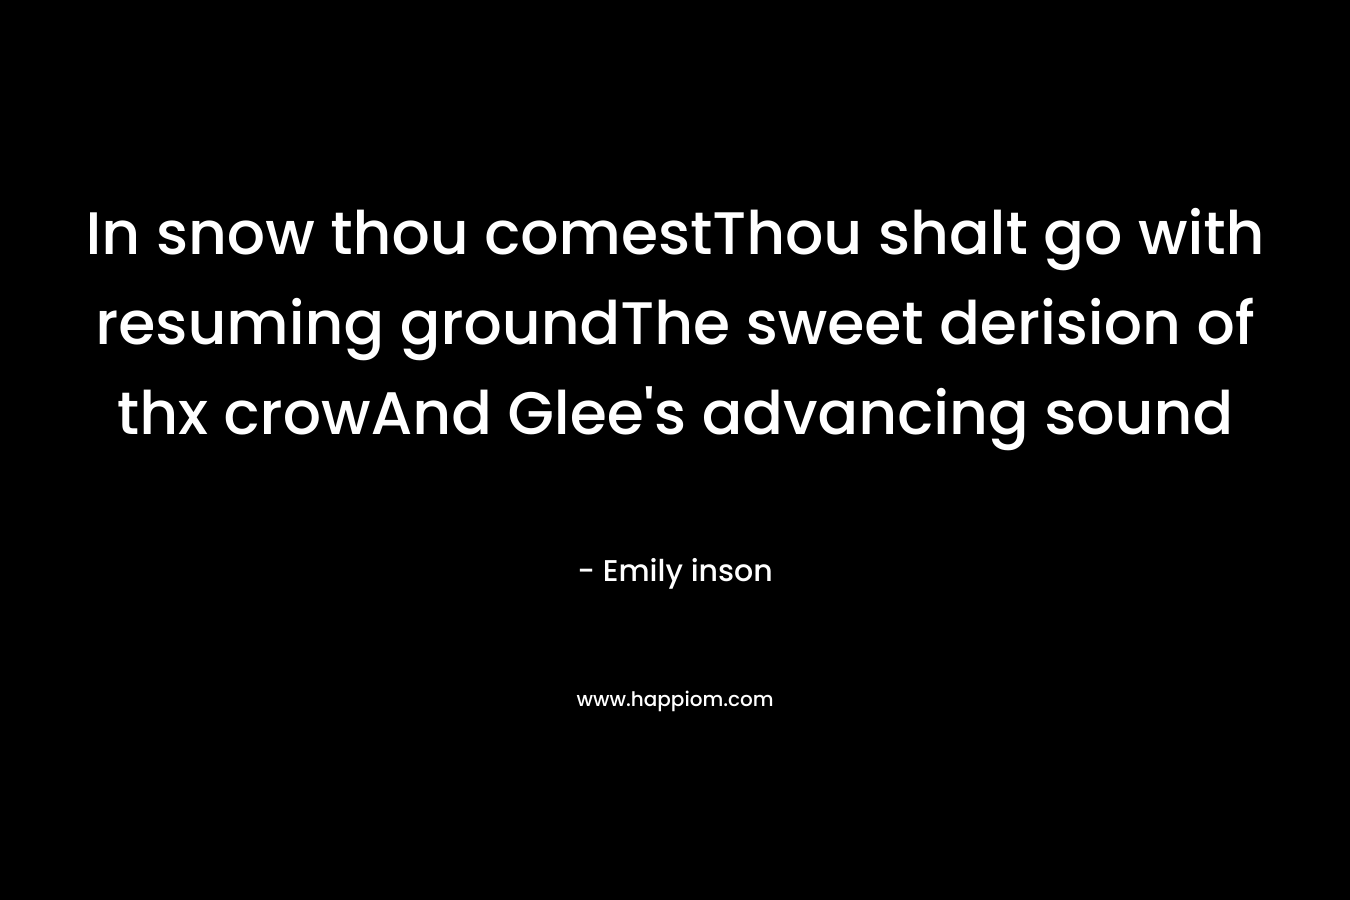 In snow thou comestThou shalt go with resuming groundThe sweet derision of thx crowAnd Glee’s advancing sound – Emily inson